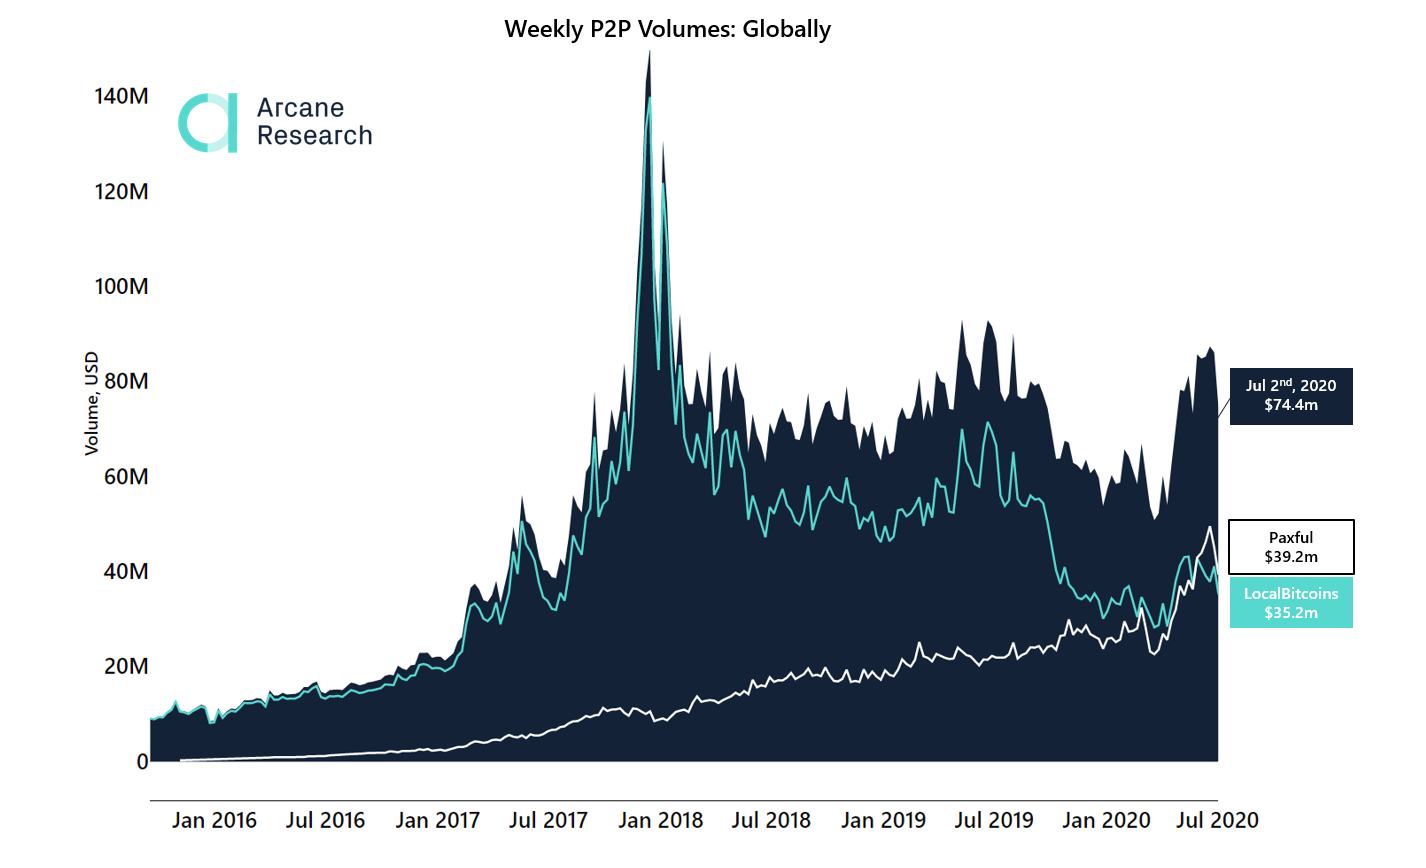 weeekly p2p volumes, globally